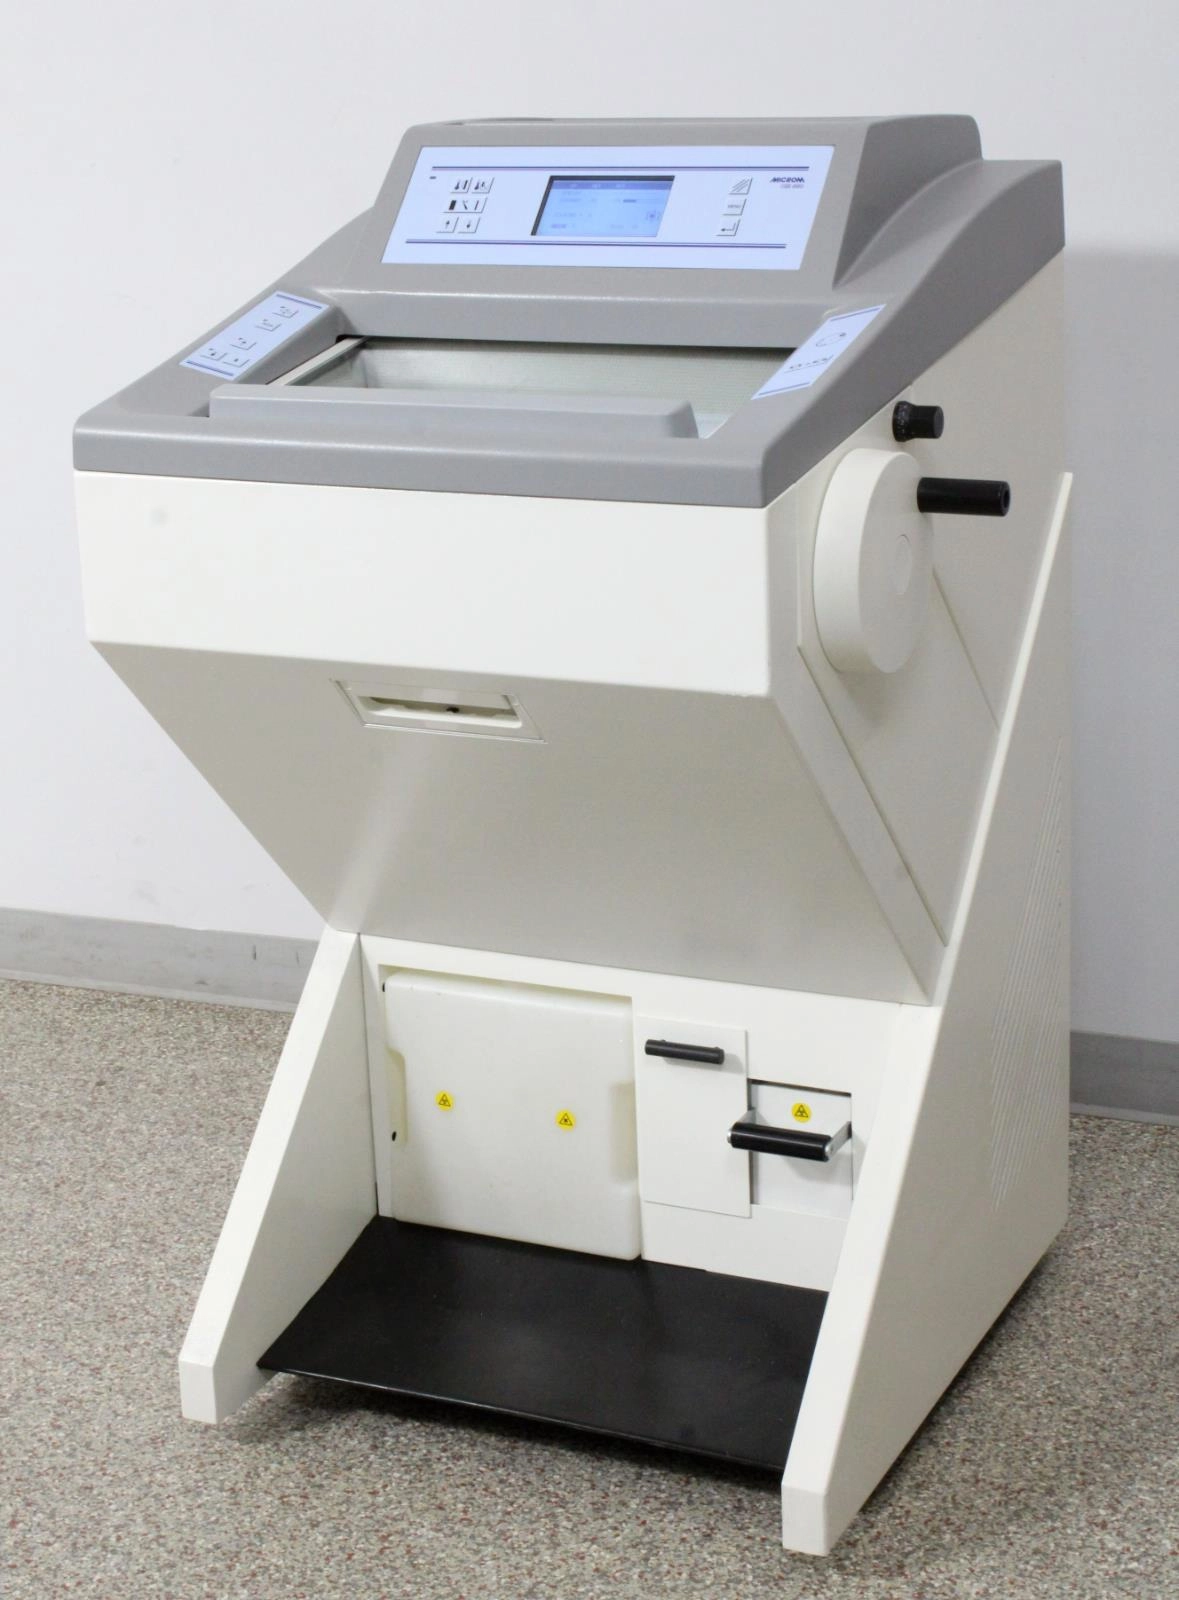 Thermo Microm HM 550 VP Cryostat Microtome &amp; Warranty